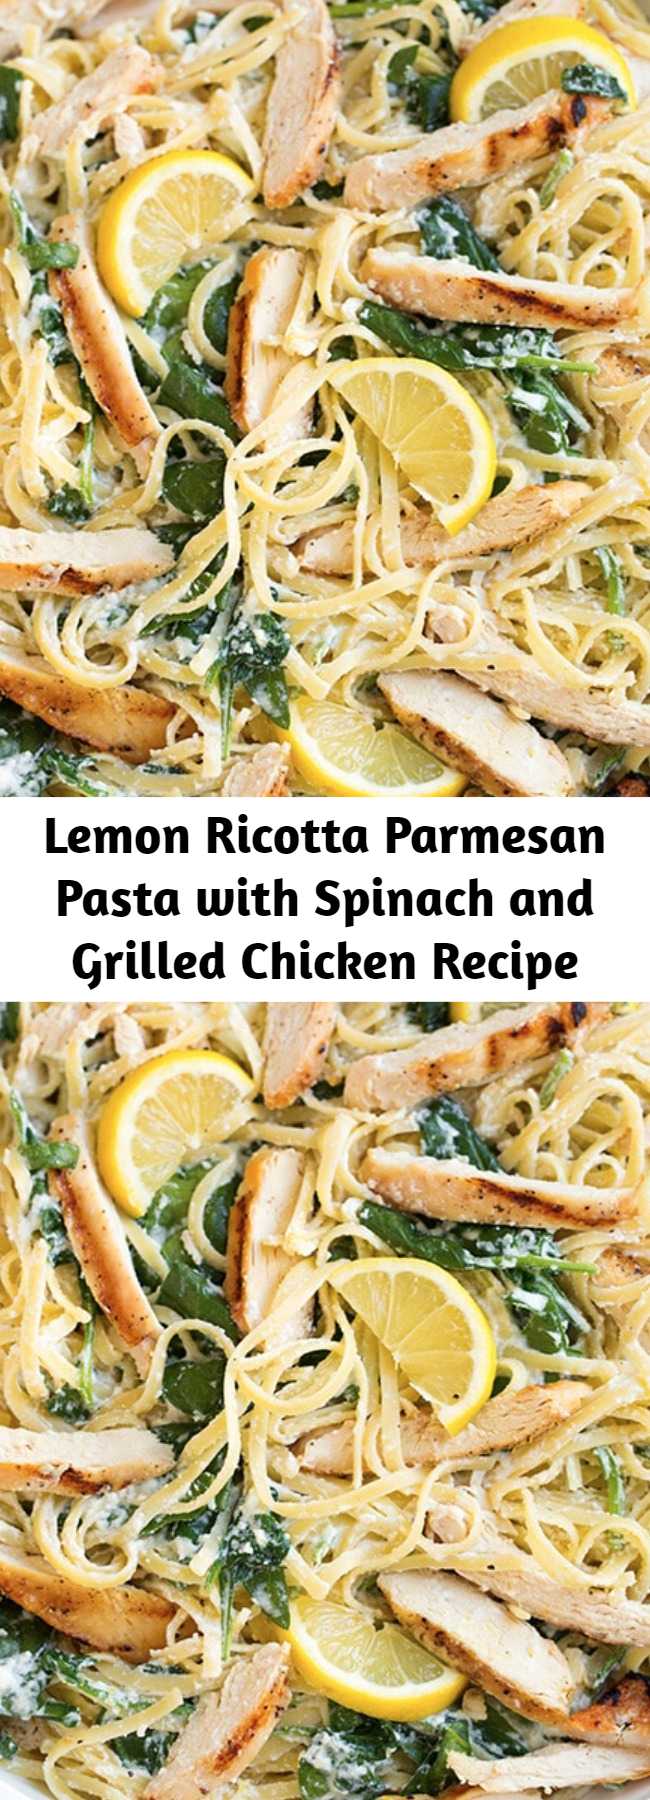 Lemon Ricotta Parmesan Pasta with Spinach and Grilled Chicken Recipe - This super quick lemon ricotta parmesan pasta with spinach and grilled chicken is perfect for weeknights.